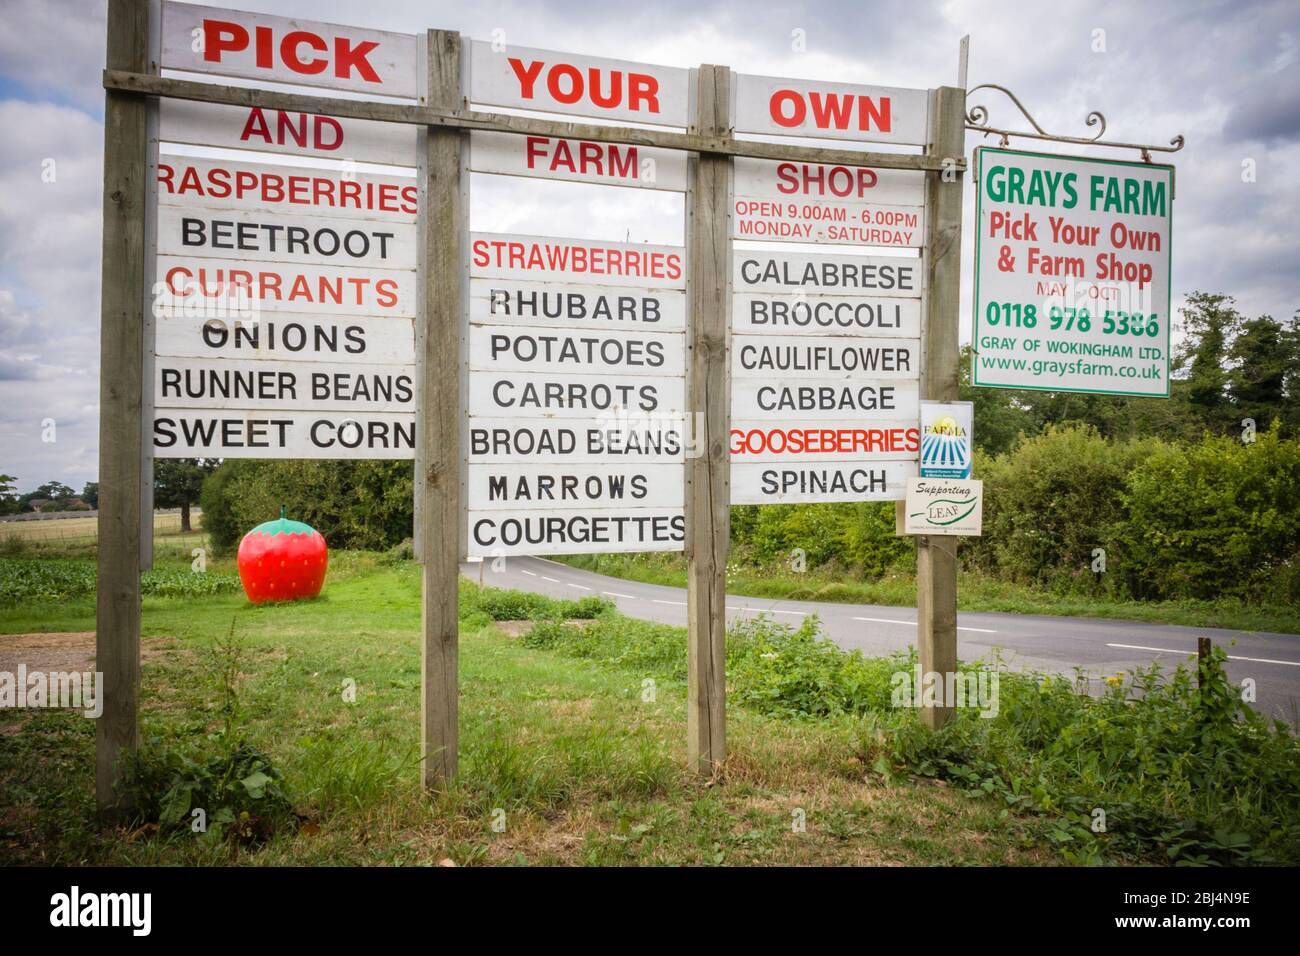 Pick Your Own and Farm Shop sign, Wokingham, Berkshire, England, GB, UK Stock Photo